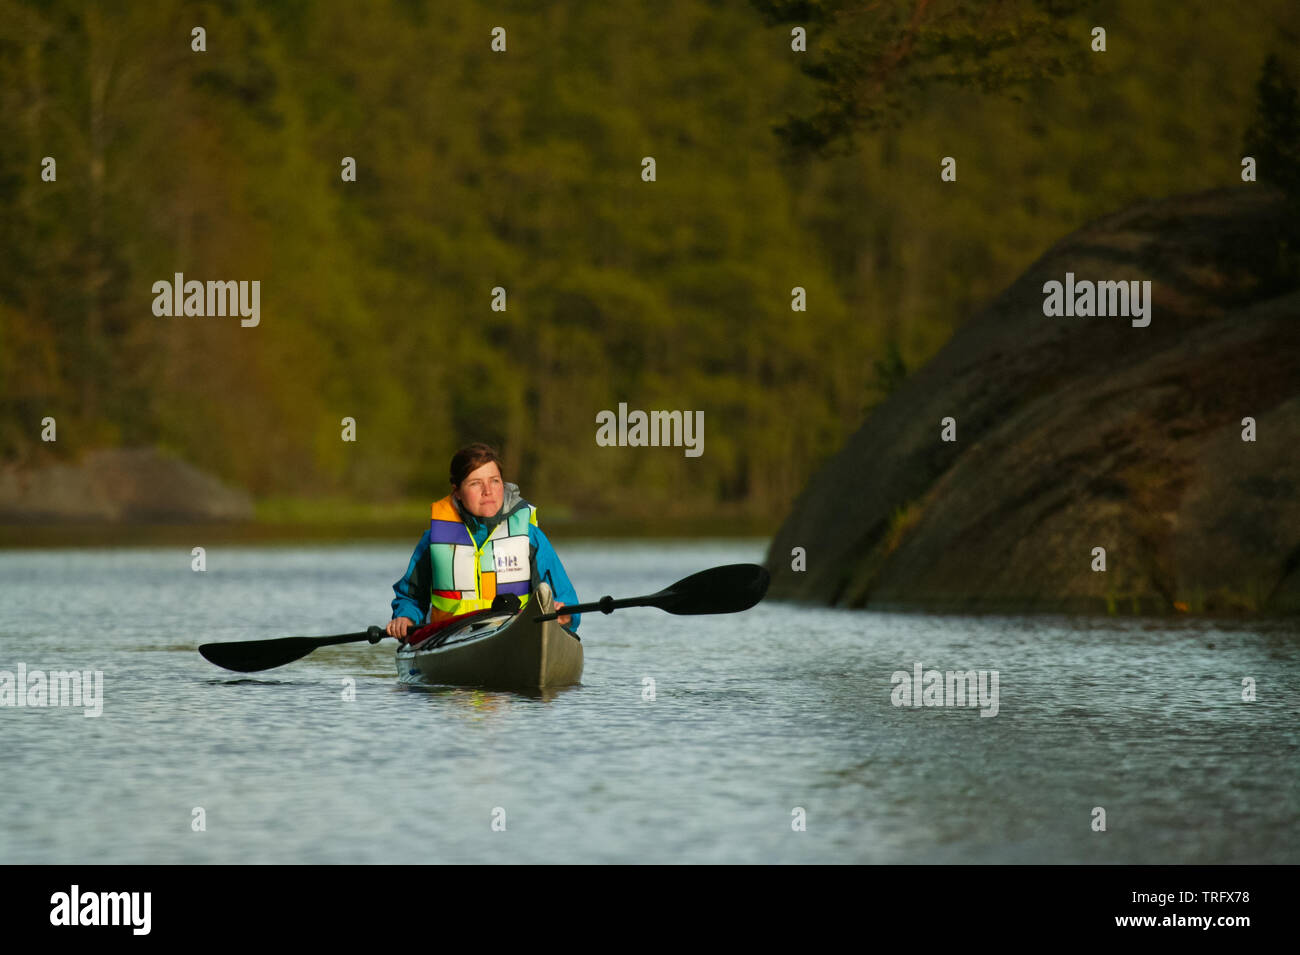 Female paddler in a kayak on the lake Vansjø in Østfold, Norway. Vansjø is the largest lake in Østfold. The lake Vansjø and its surrounding lakes and rivers are a part of the water system called Morsavassdraget. May, 2006. Stock Photo